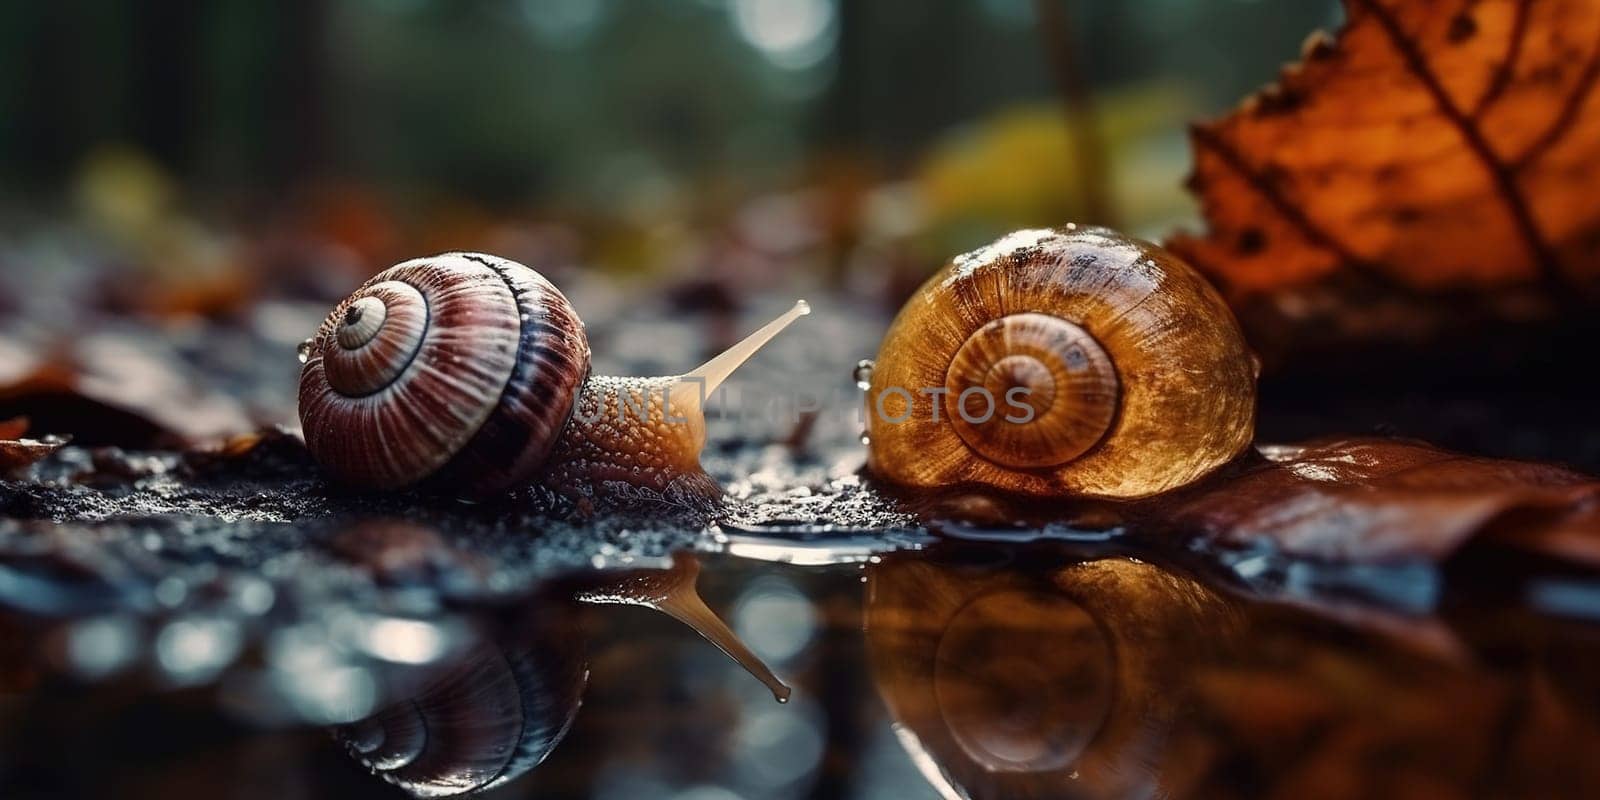 Snails Drinks Water From The Puddle In The Autumn Fortst, Animal In Natural Habitat